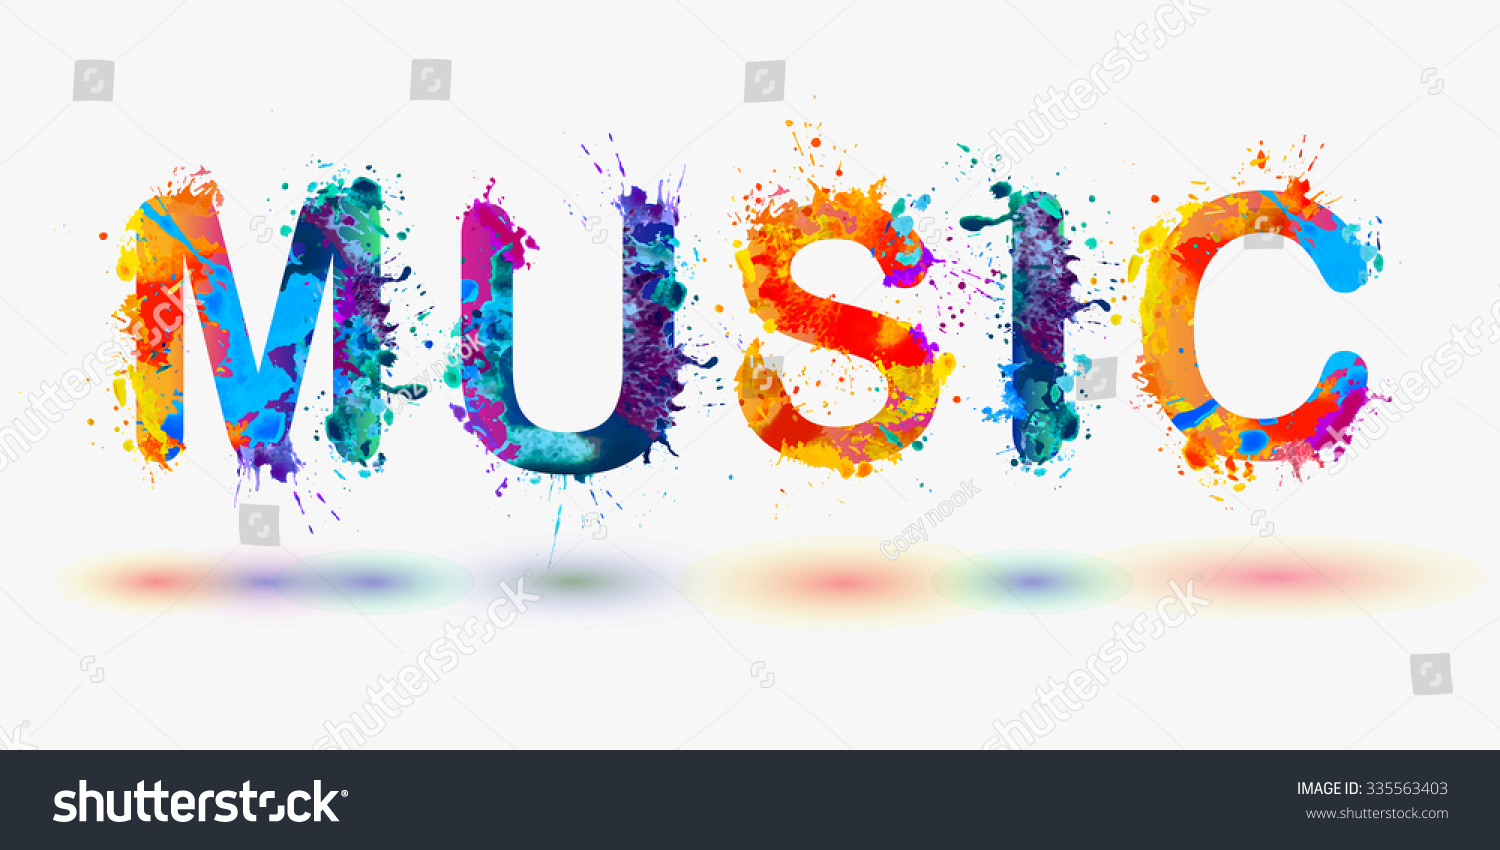 music clipart for word - photo #6